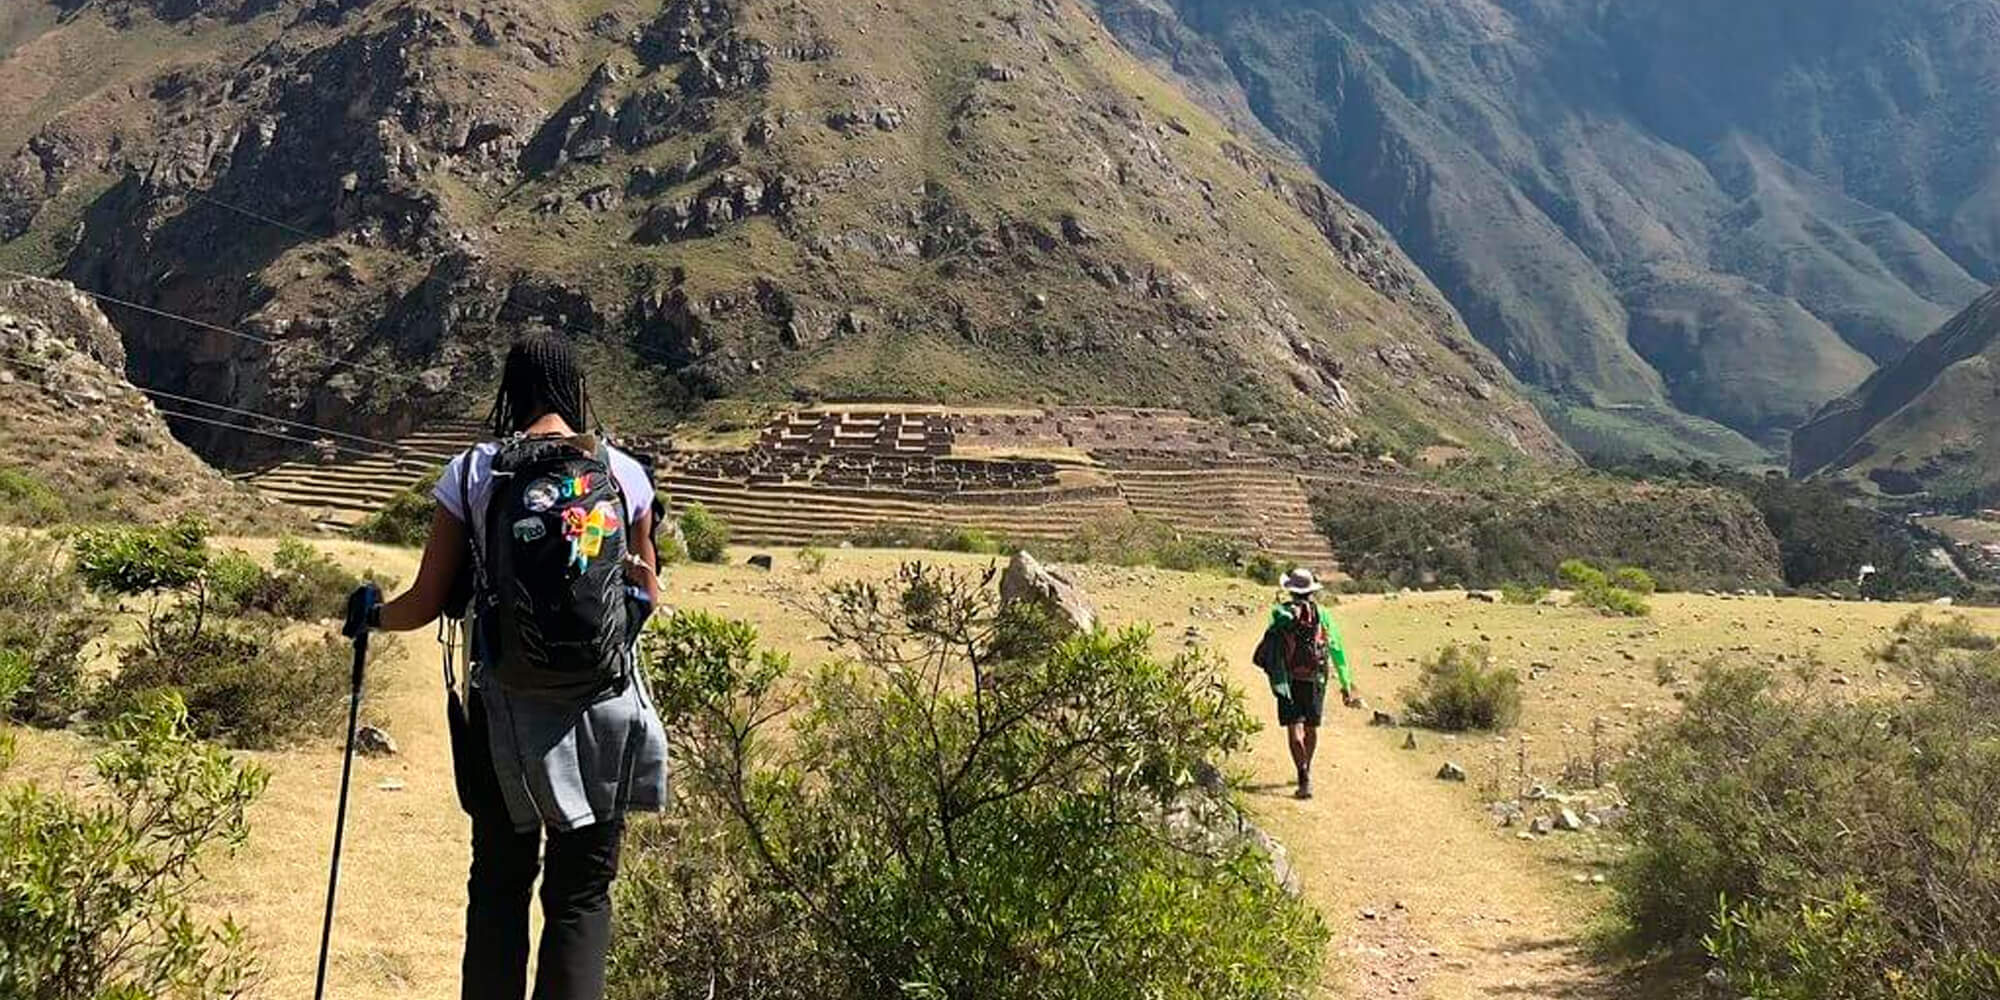 Why the Inca Trail Allows Only 500 People Per Day